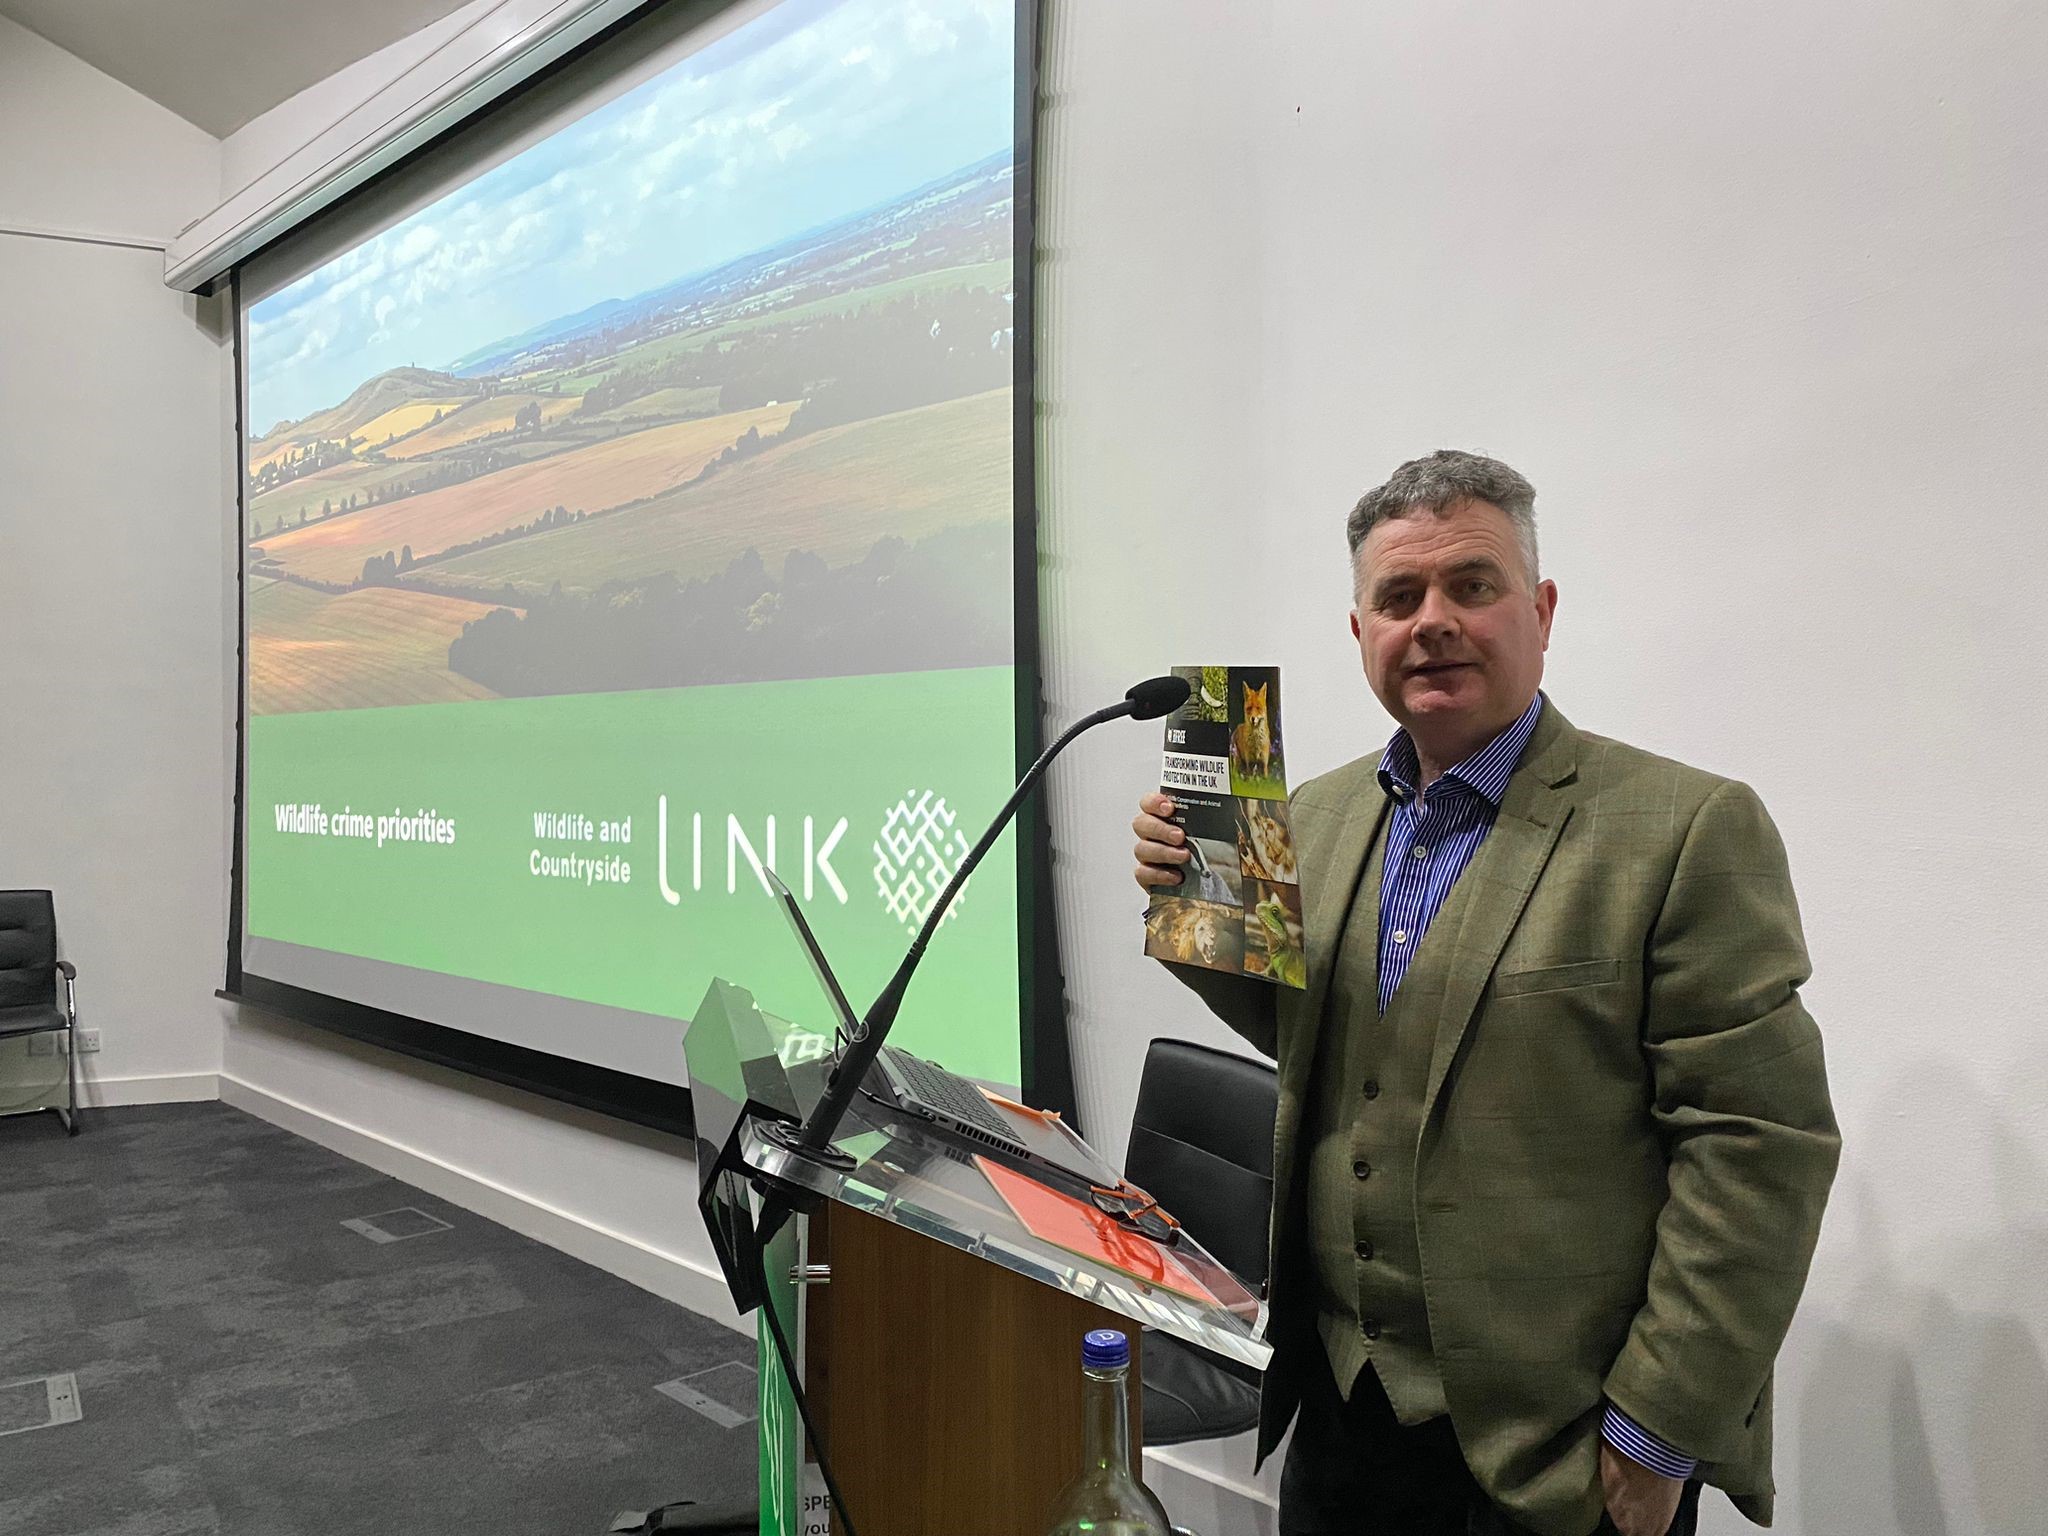 Born Free UK Policy Advisor Dominic Dyer stood in front of a projector screen, holding a copy of the Wildlife Manifesto